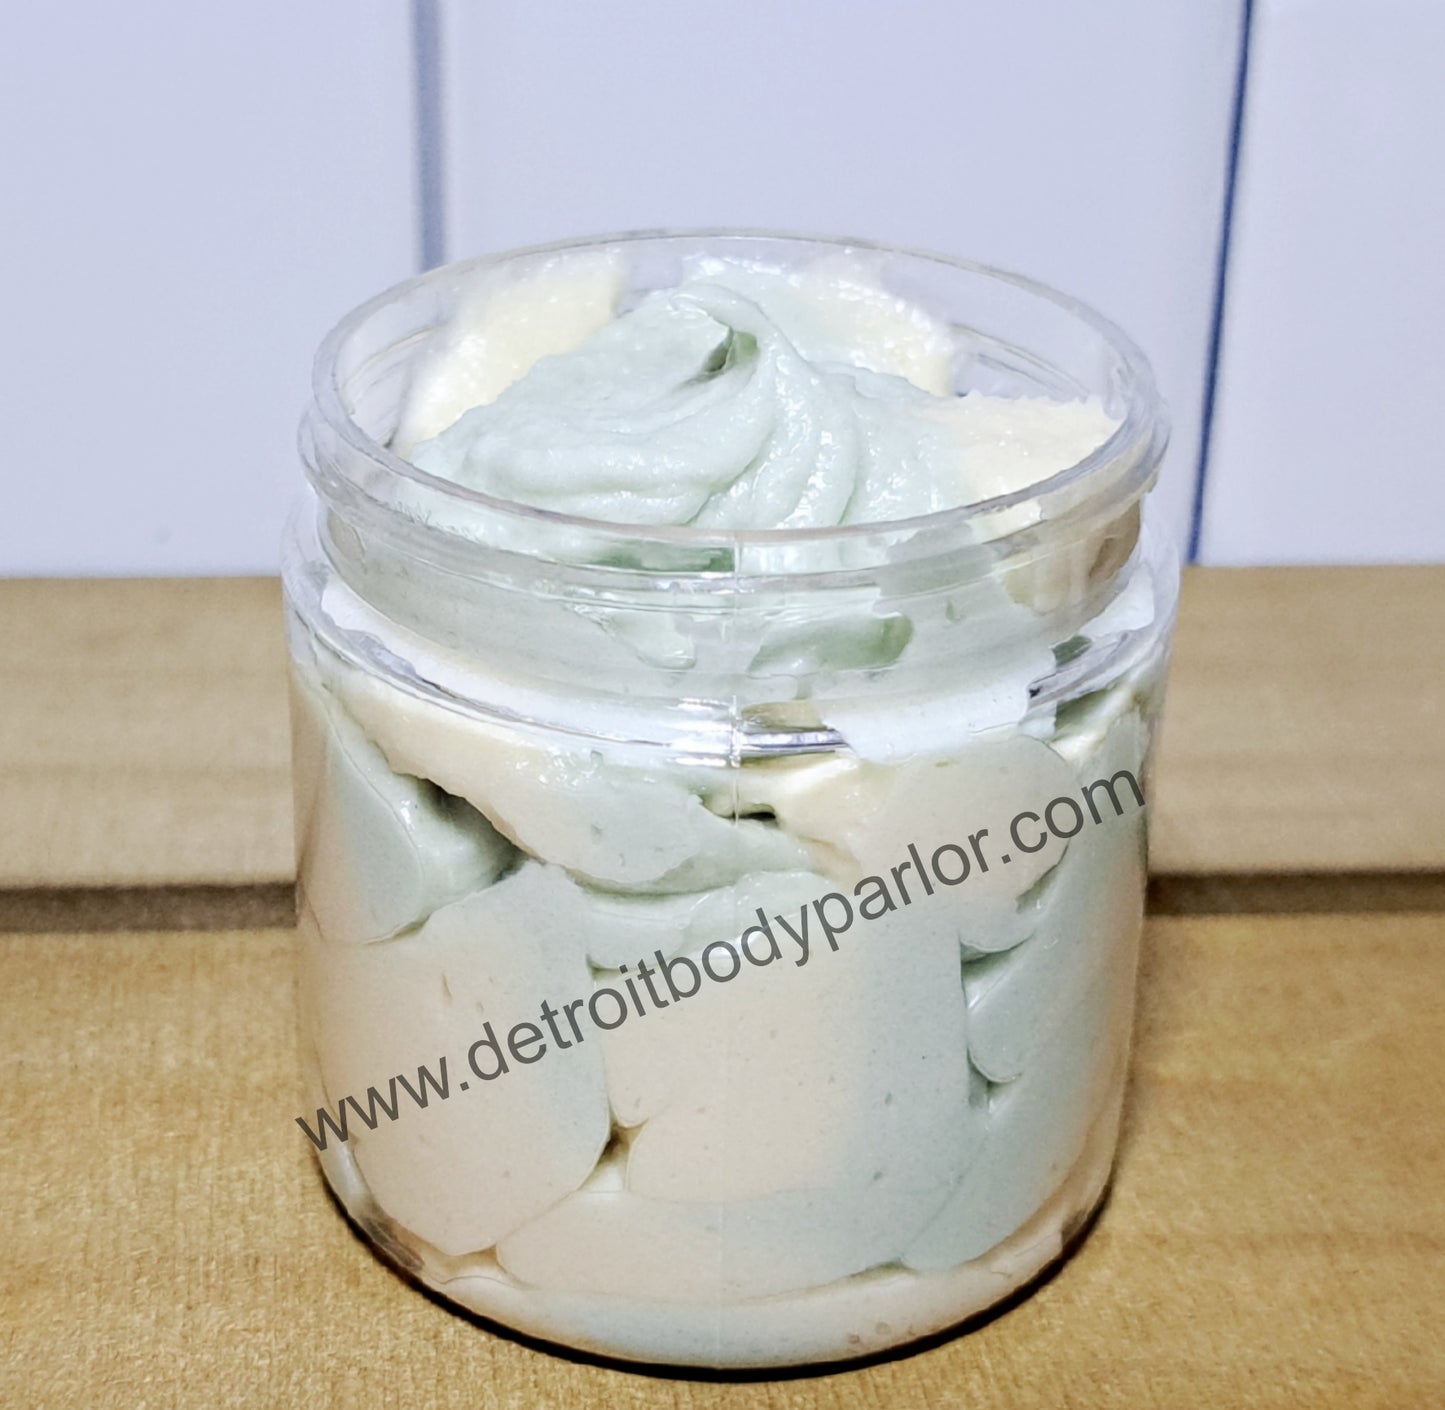 Sultry Sunrise Whipped Body Butter